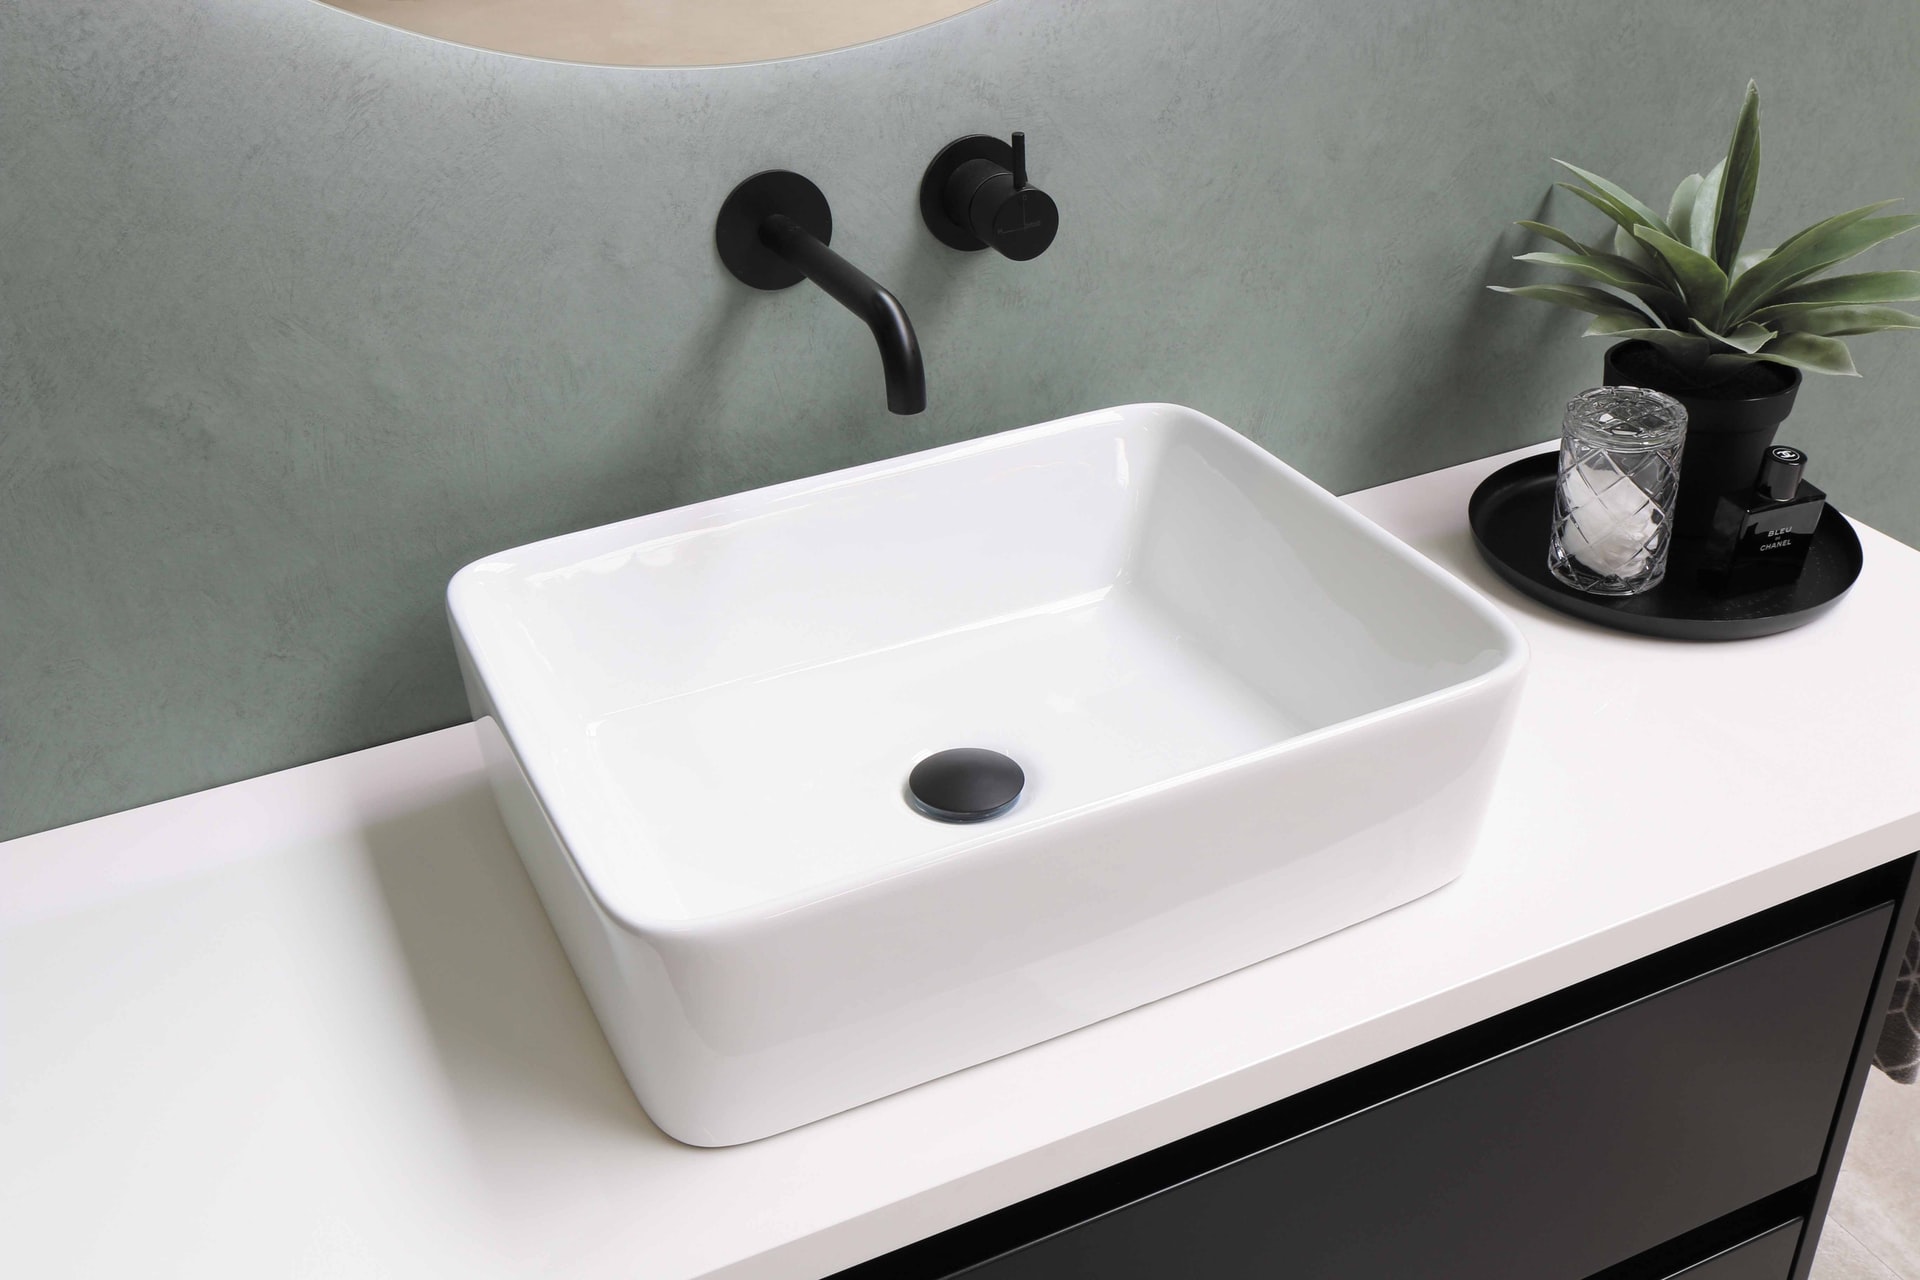 a cool looking sink wow that's pretty good